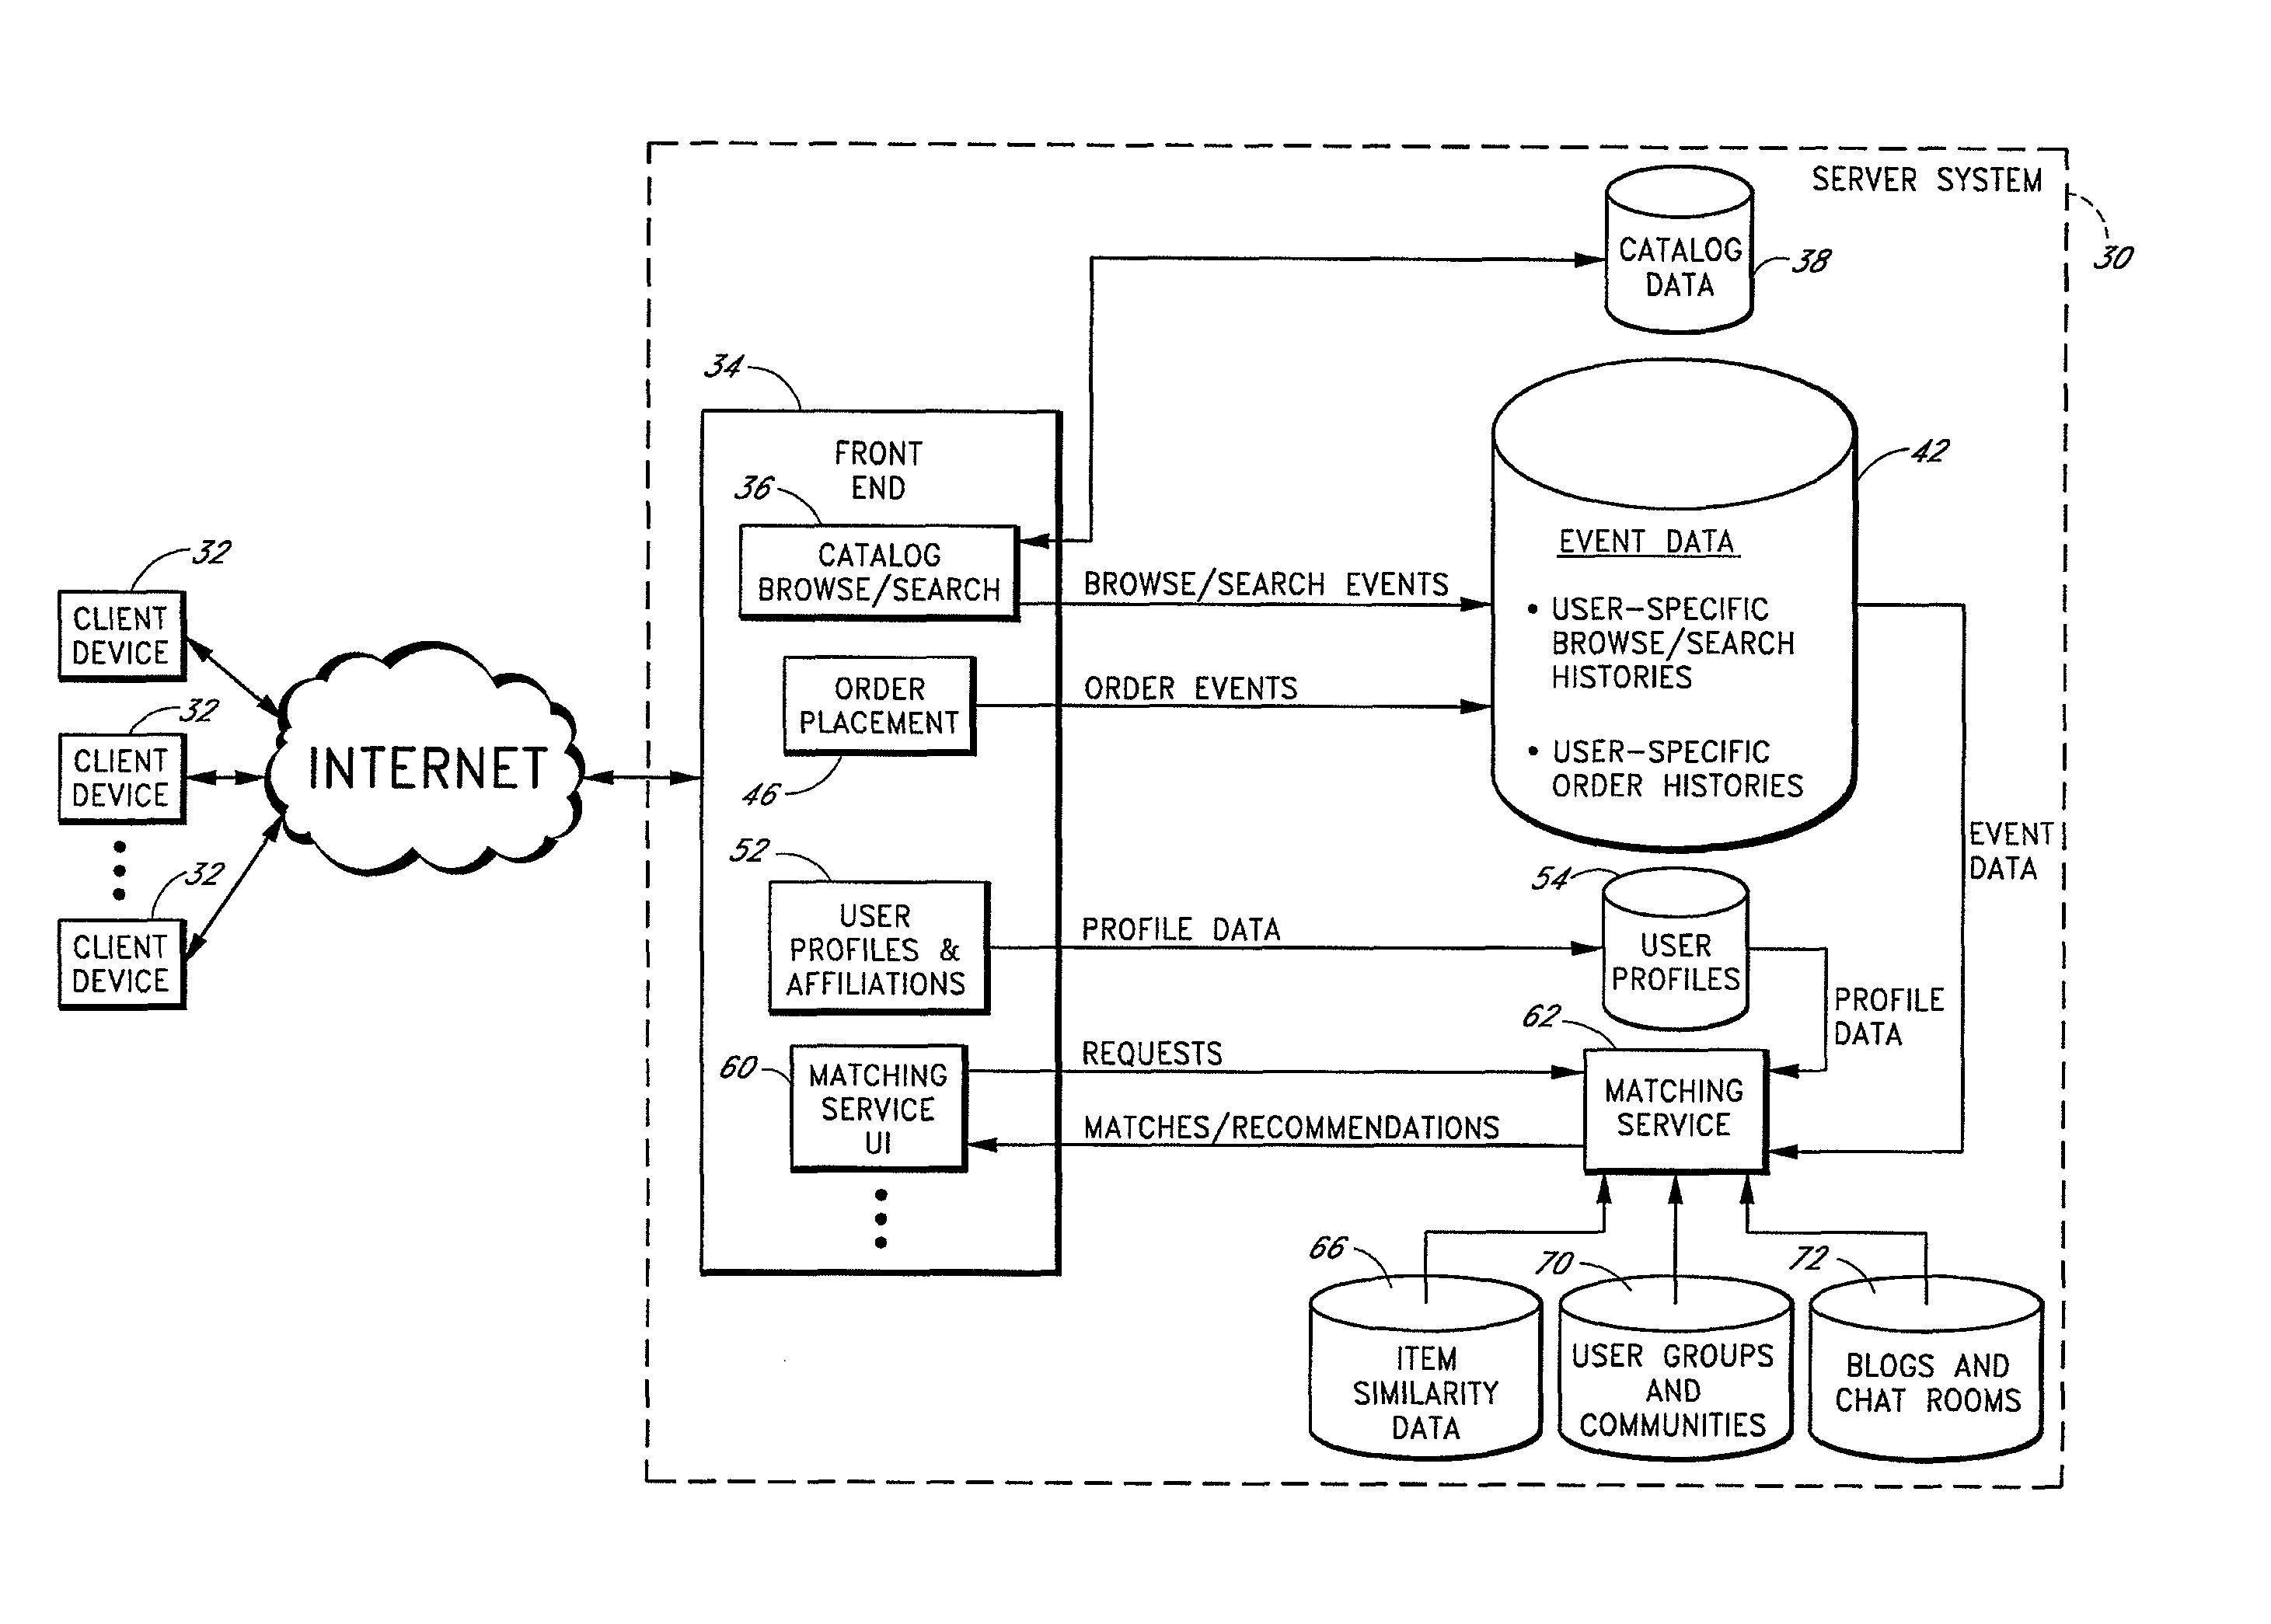 Mining of user event data to identify users with common interests  - US-8224773-B2